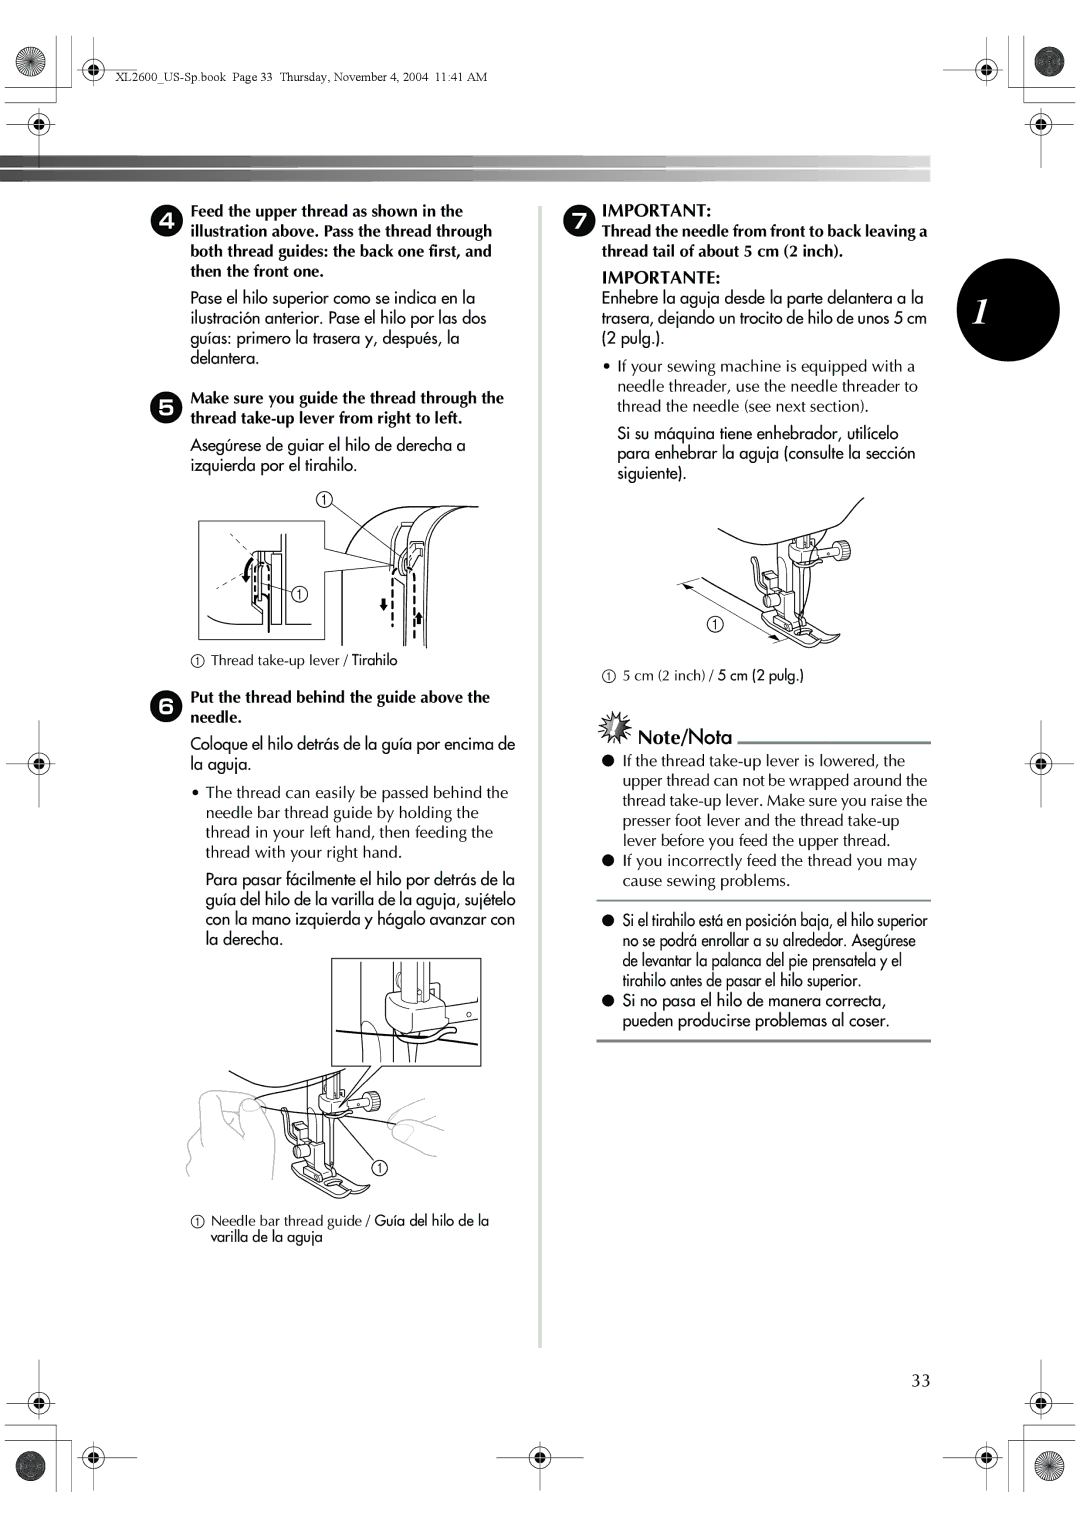 Brother XL-3500 operation manual Putneedle.the thread behind the guide above 